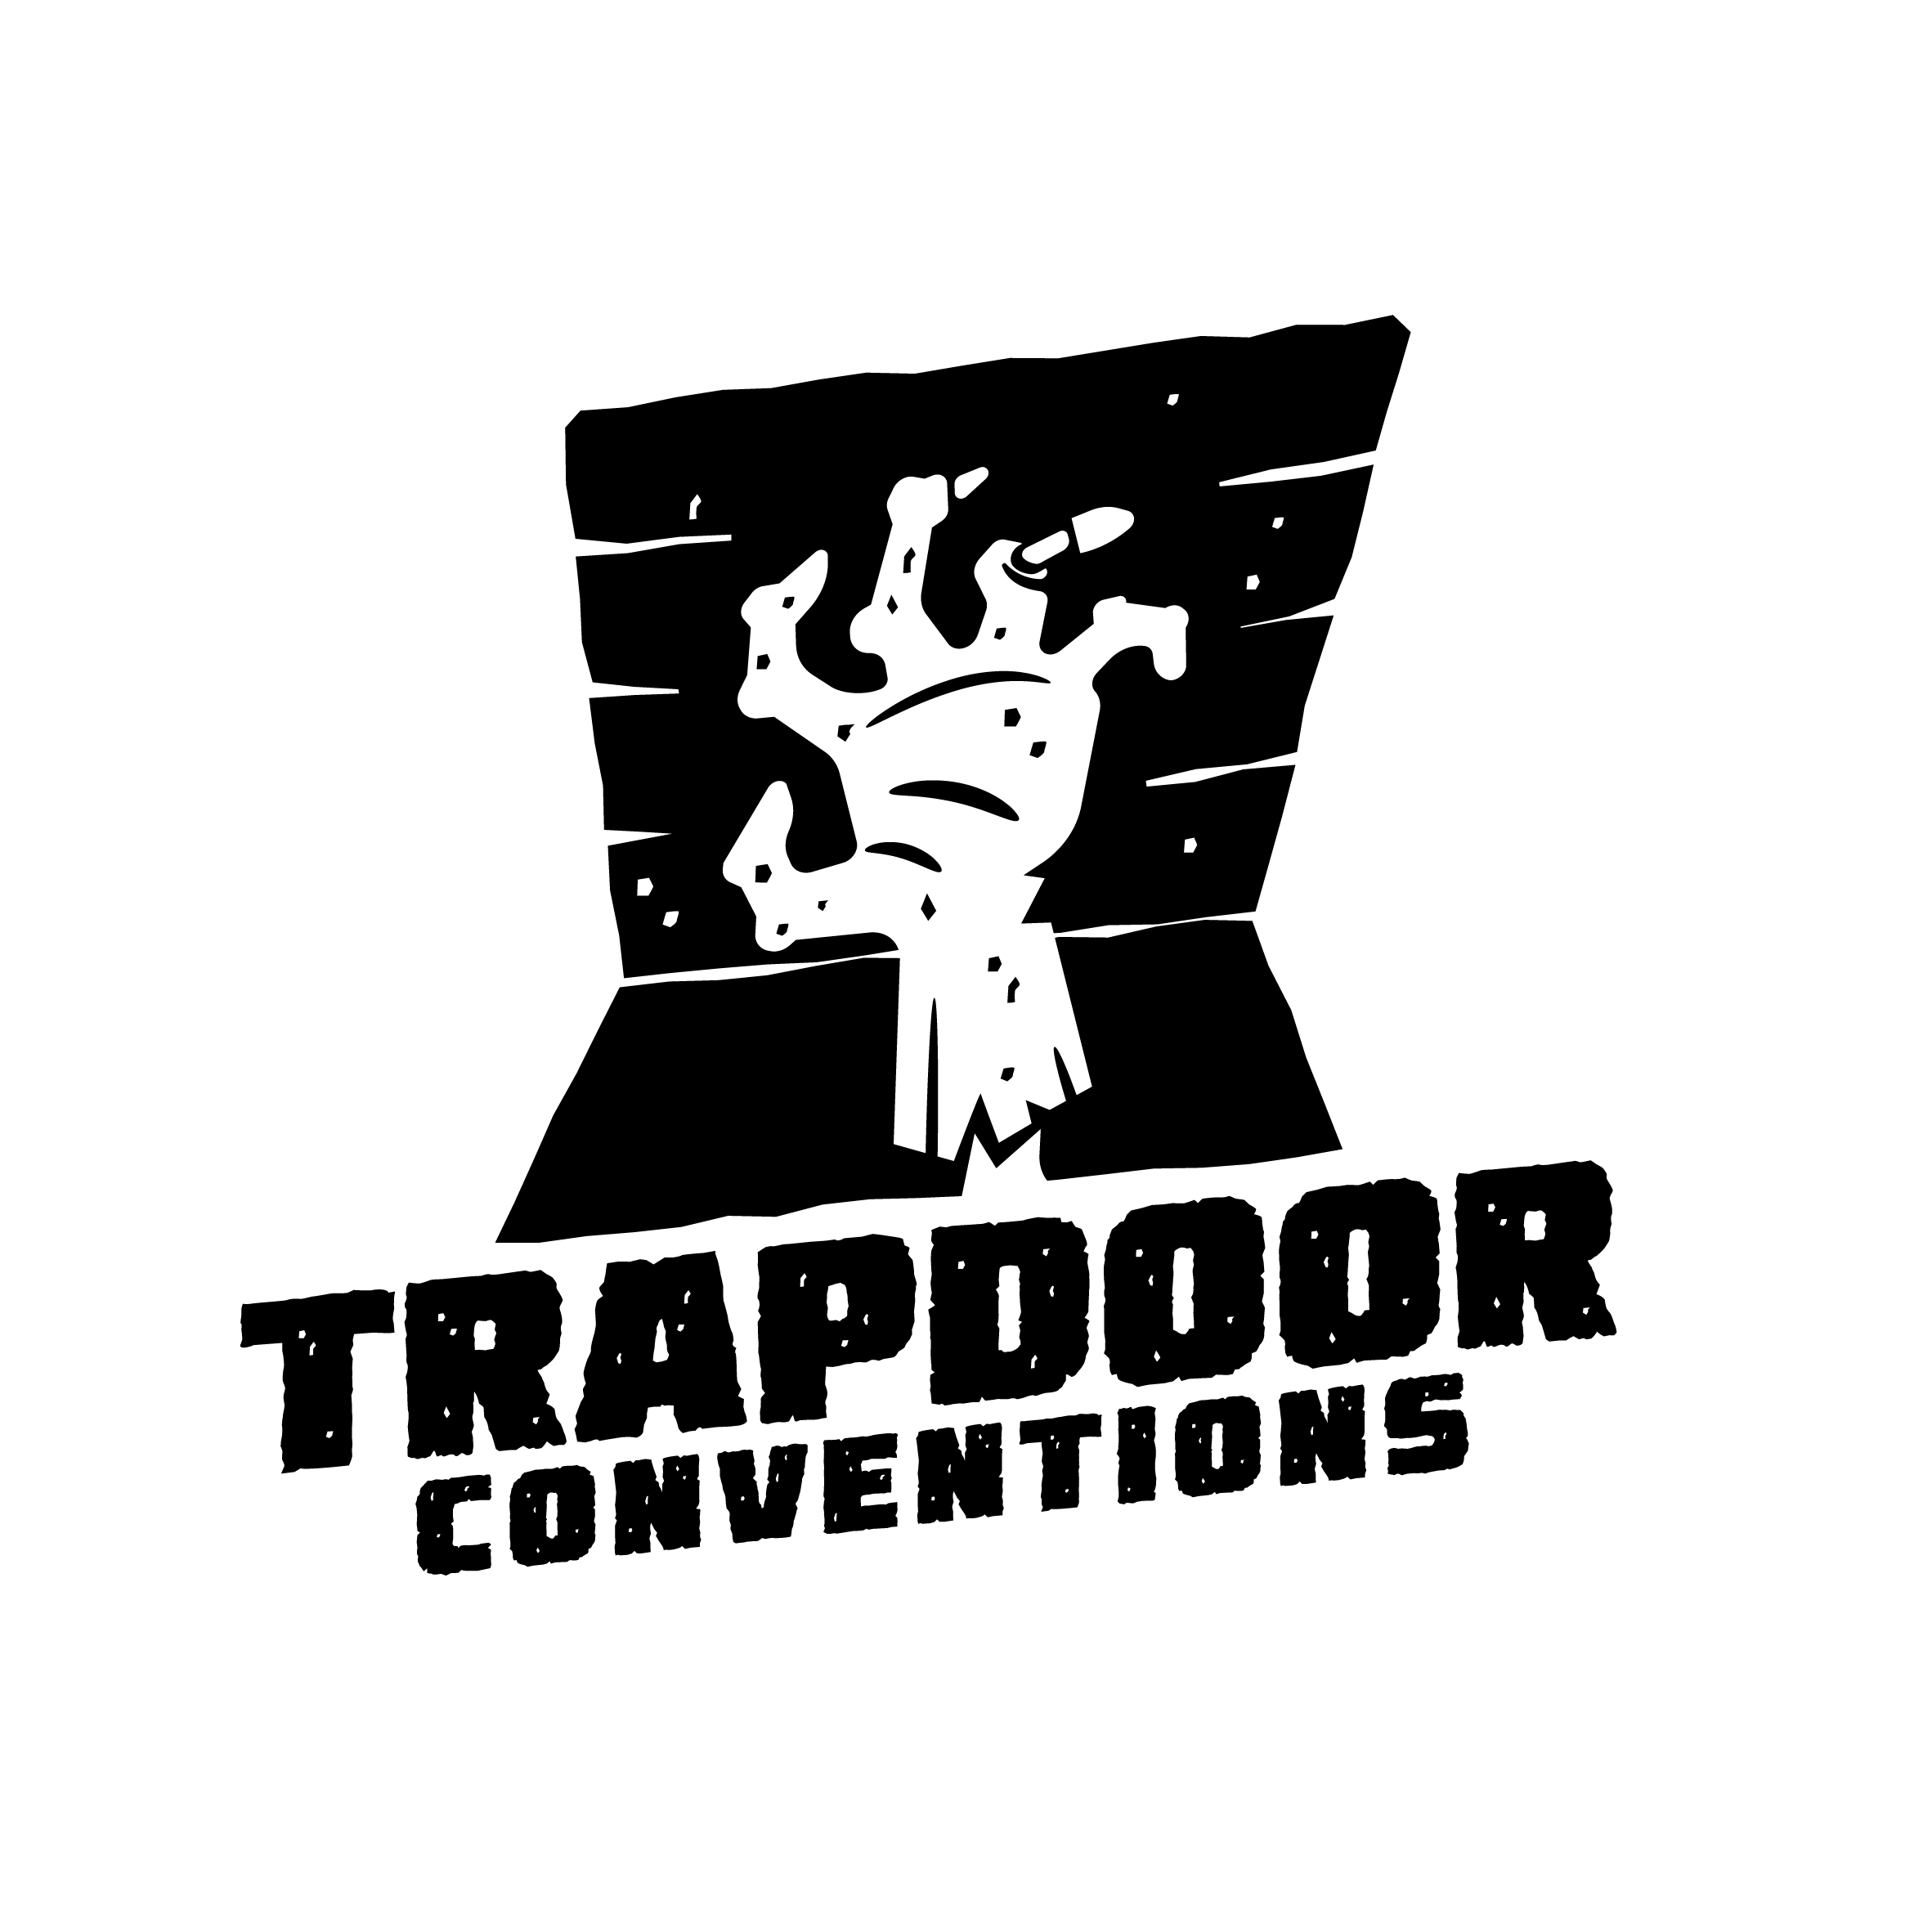 Trapdoor Conventions logo design by logo designer Tortoiseshell Black for your inspiration and for the worlds largest logo competition